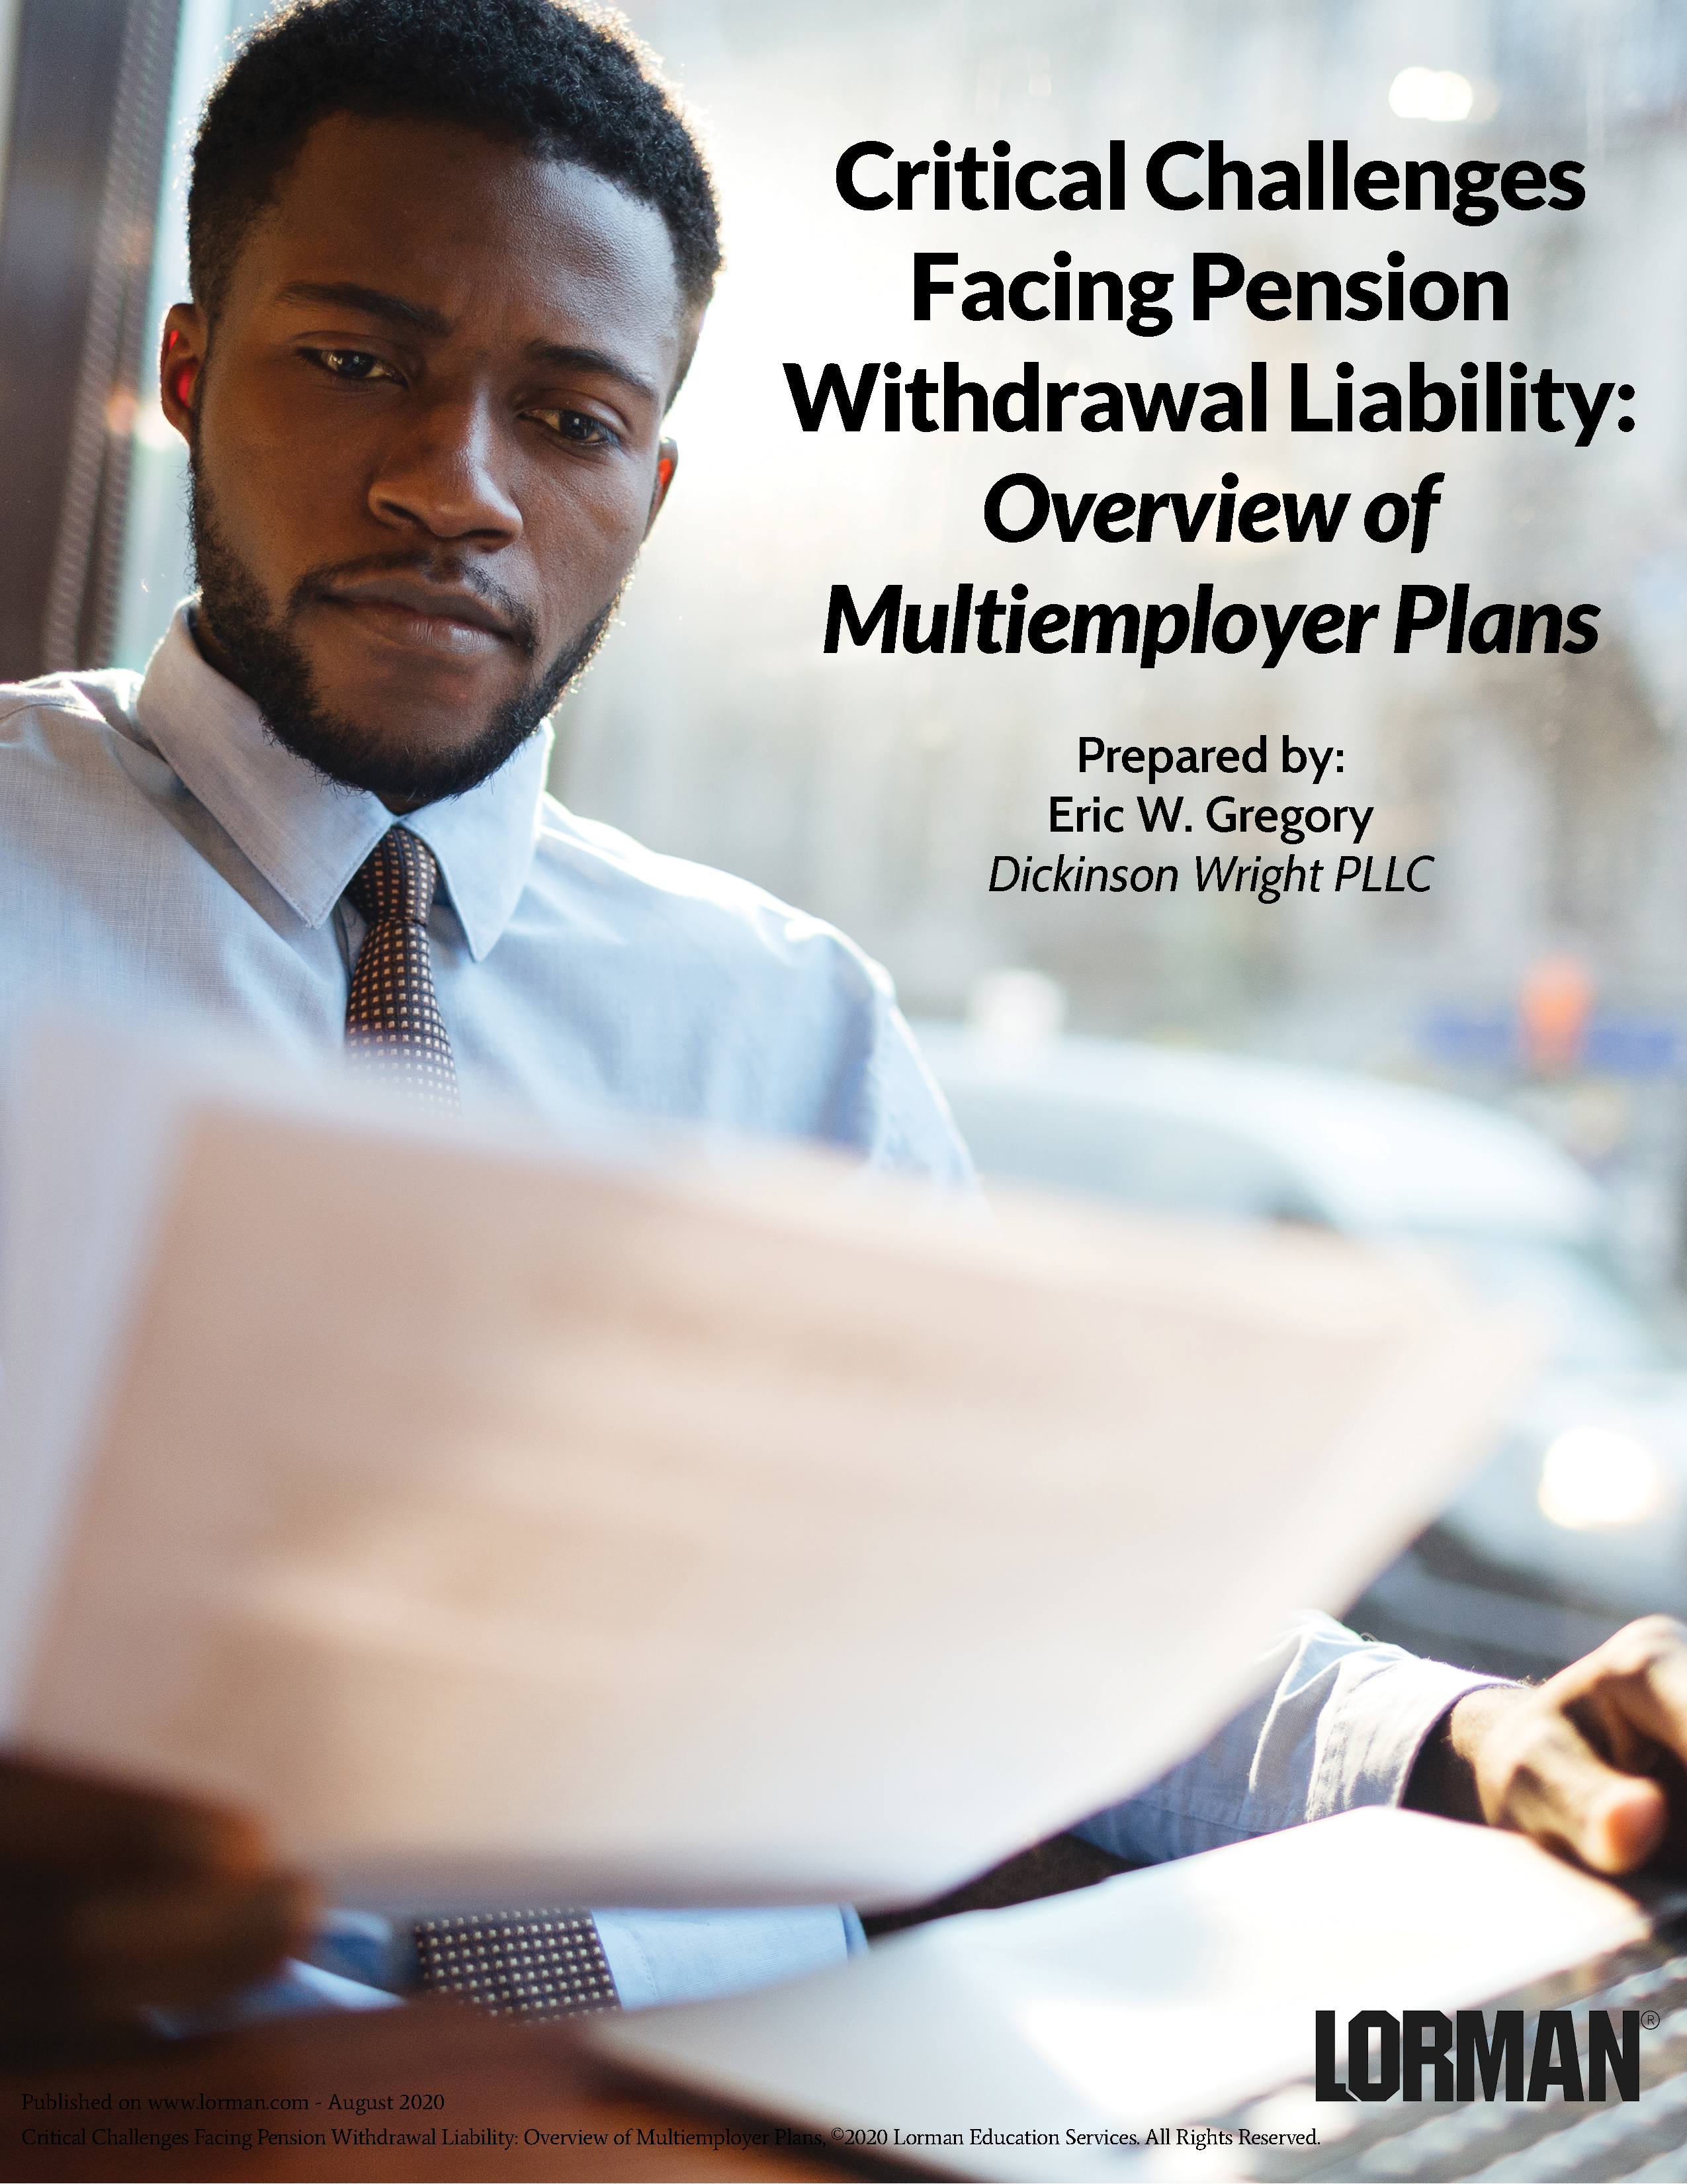 Critical Challenges Facing Pension Withdrawal Liability: Overview of Multiemployer Plans